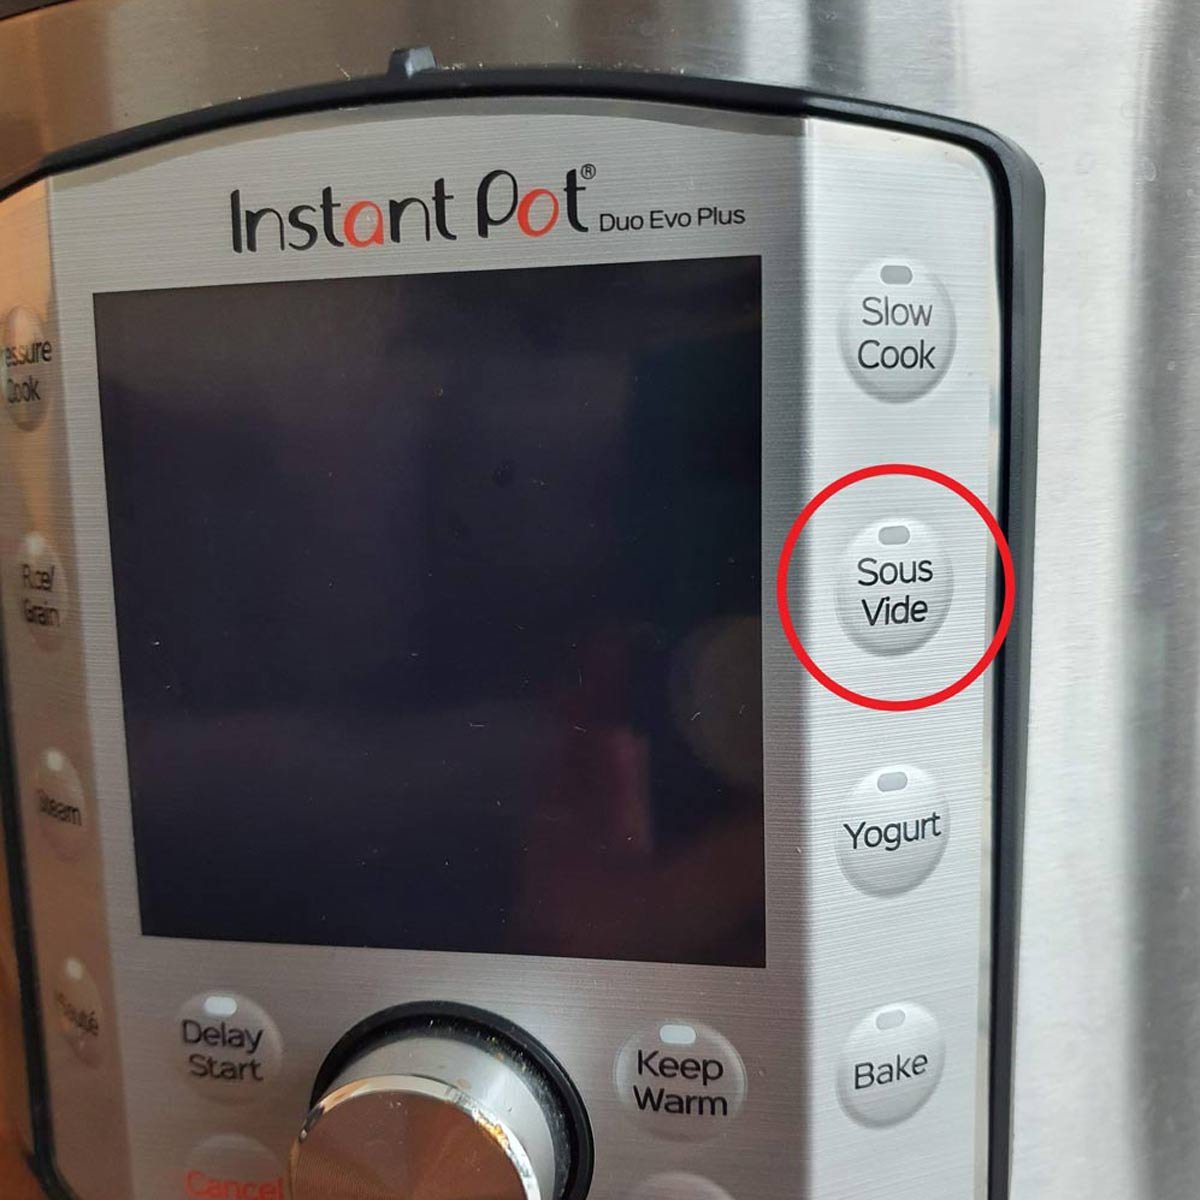 How To Cook Sous Vide in the Instant Pot